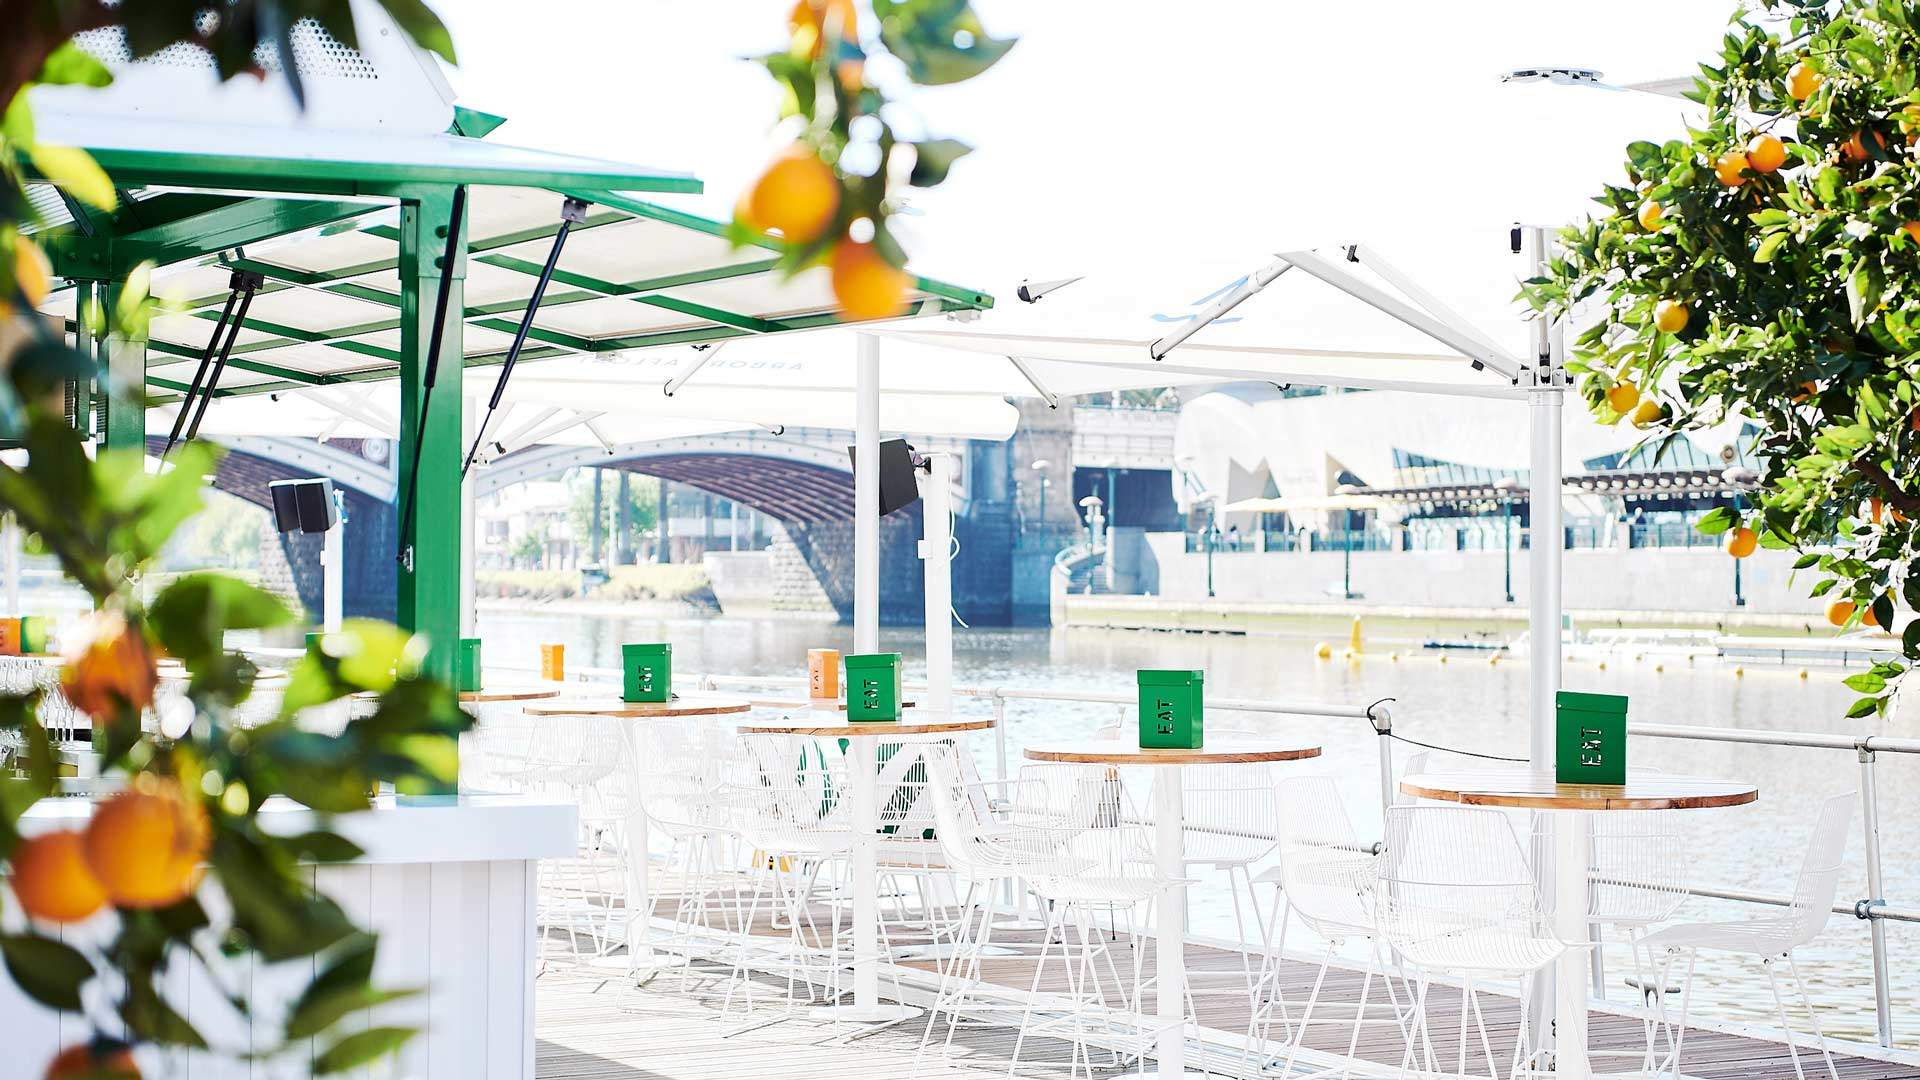 Arbory's Floating Bar Has Returned to the Yarra for Another Summer of Drinks on the River